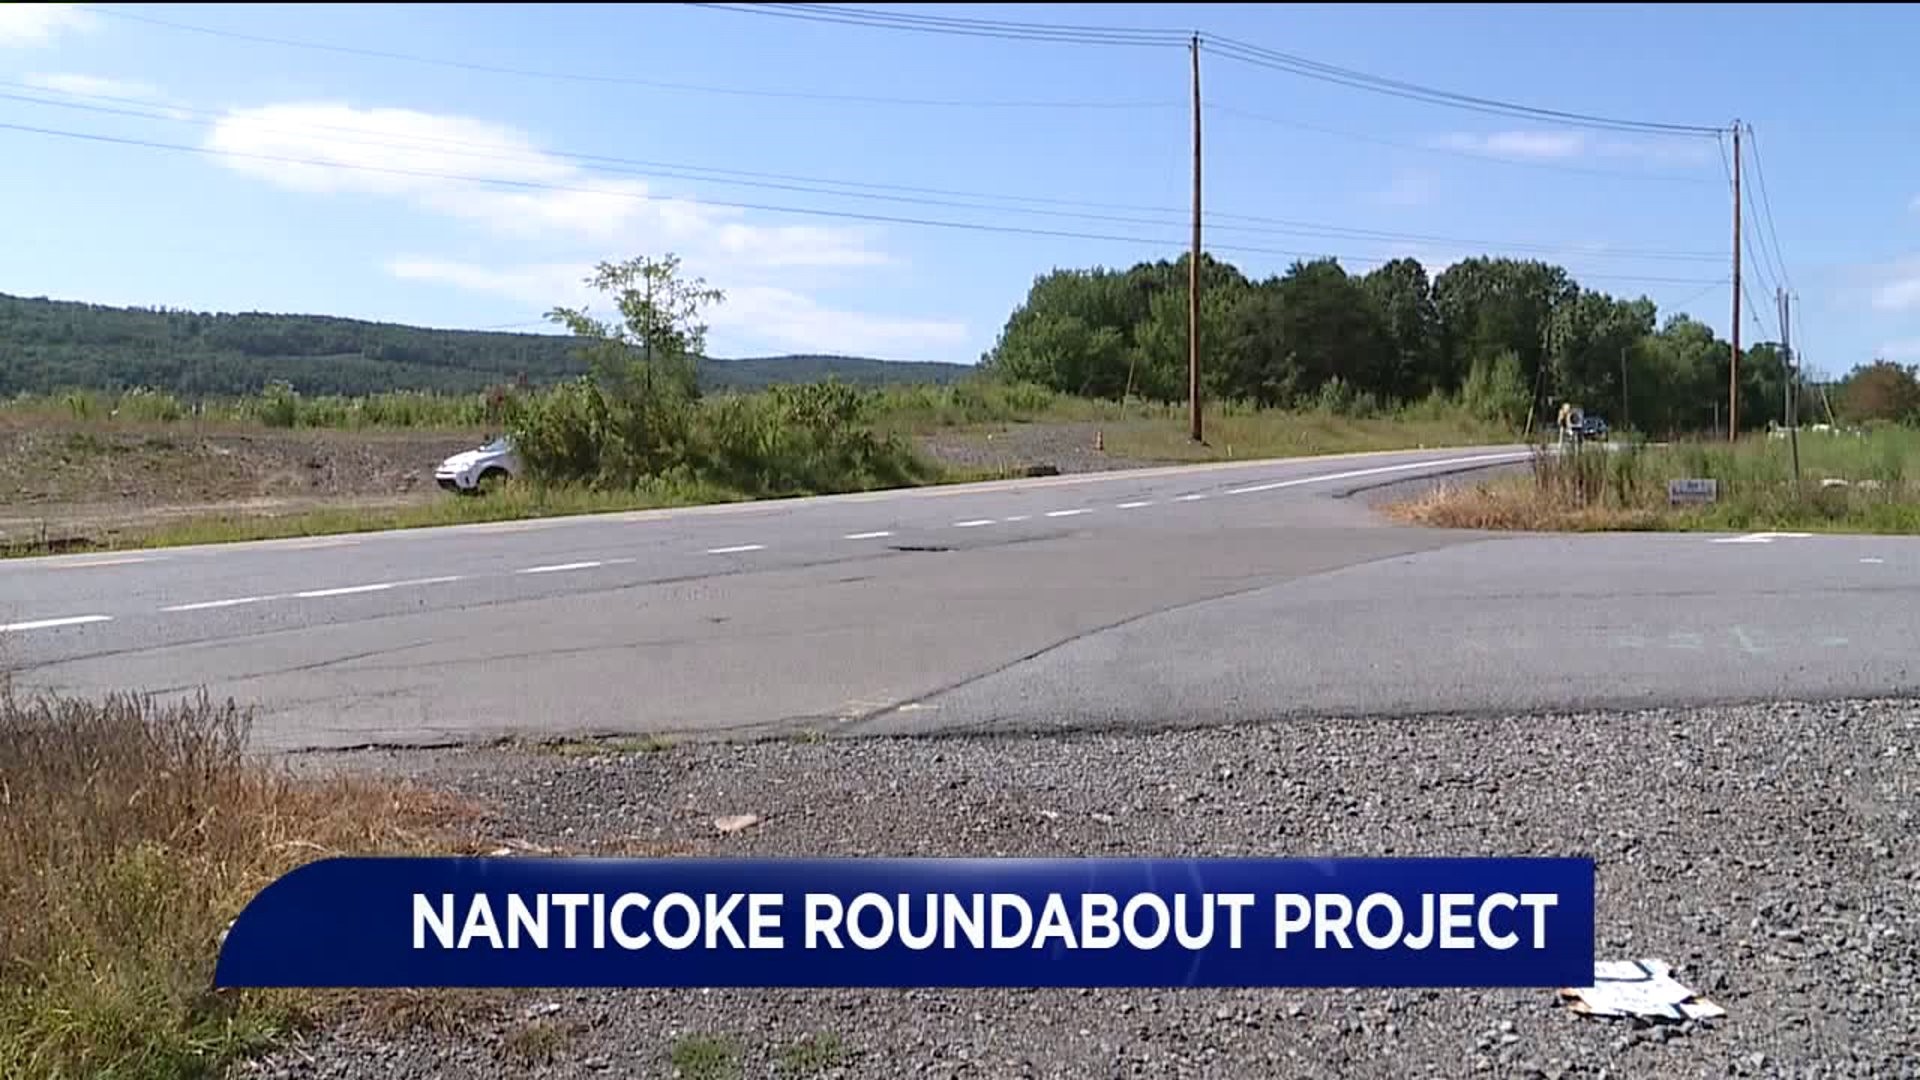 Final Phase of Nanticoke Roundabout Project to Begin